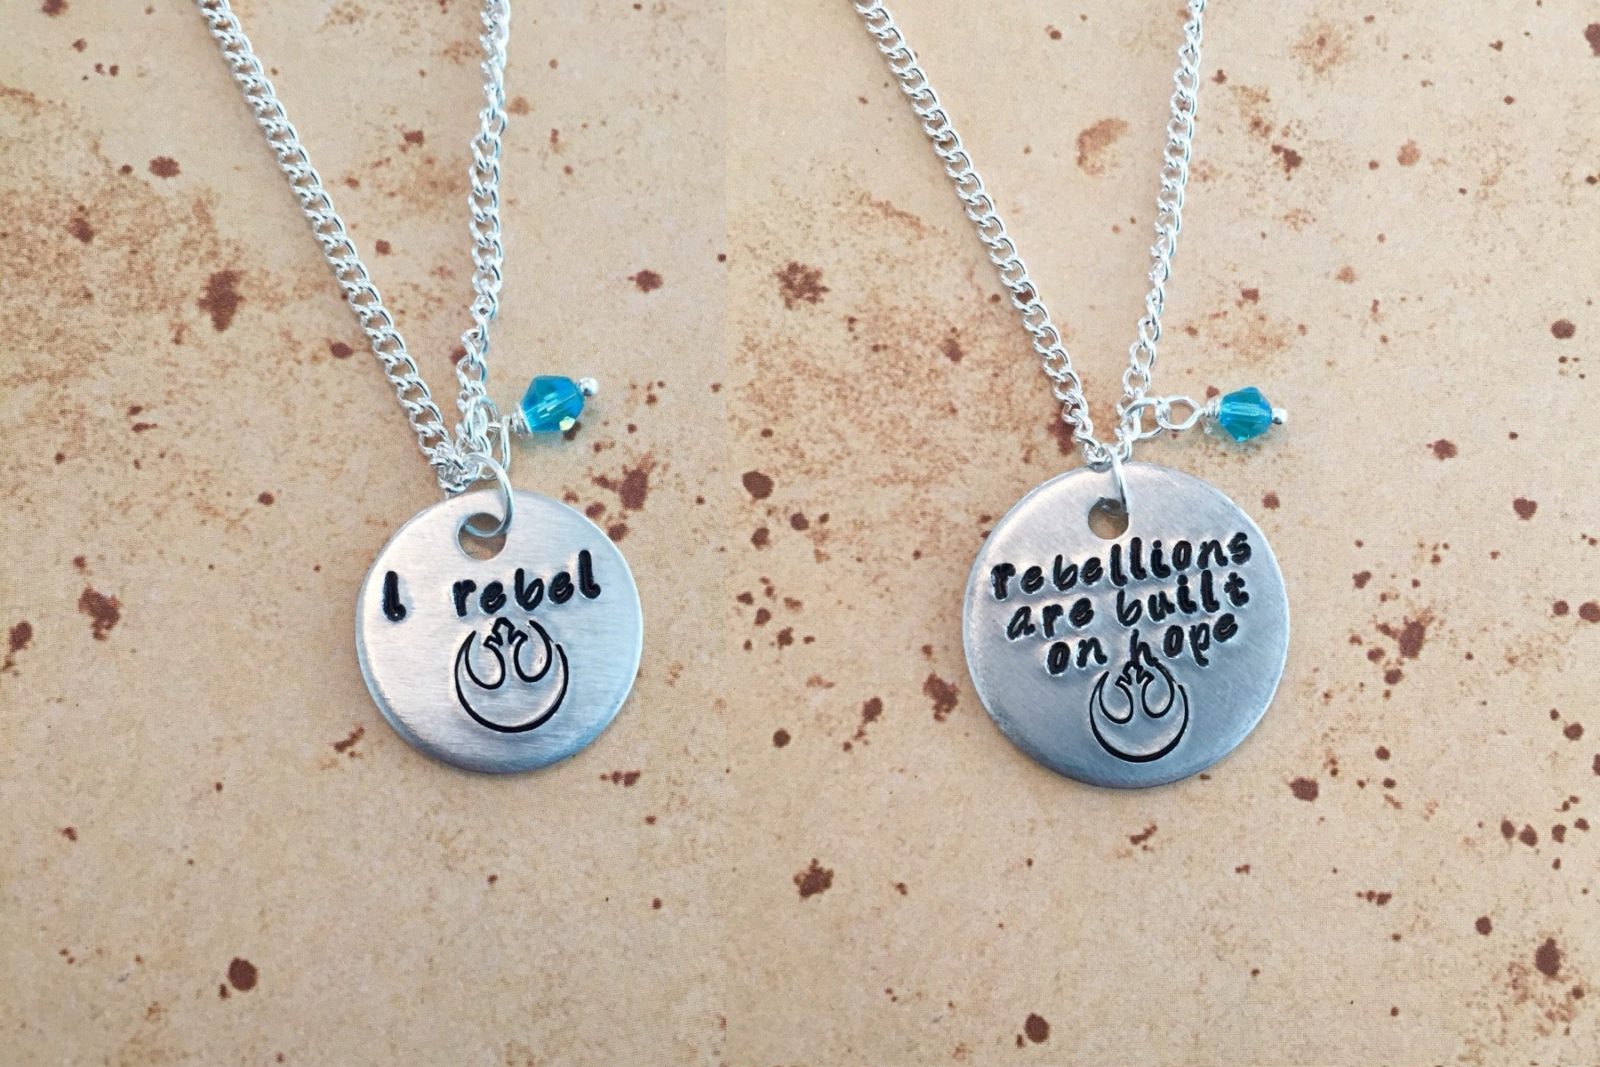 Jyn Erso Inspired Stamped Charm Necklaces